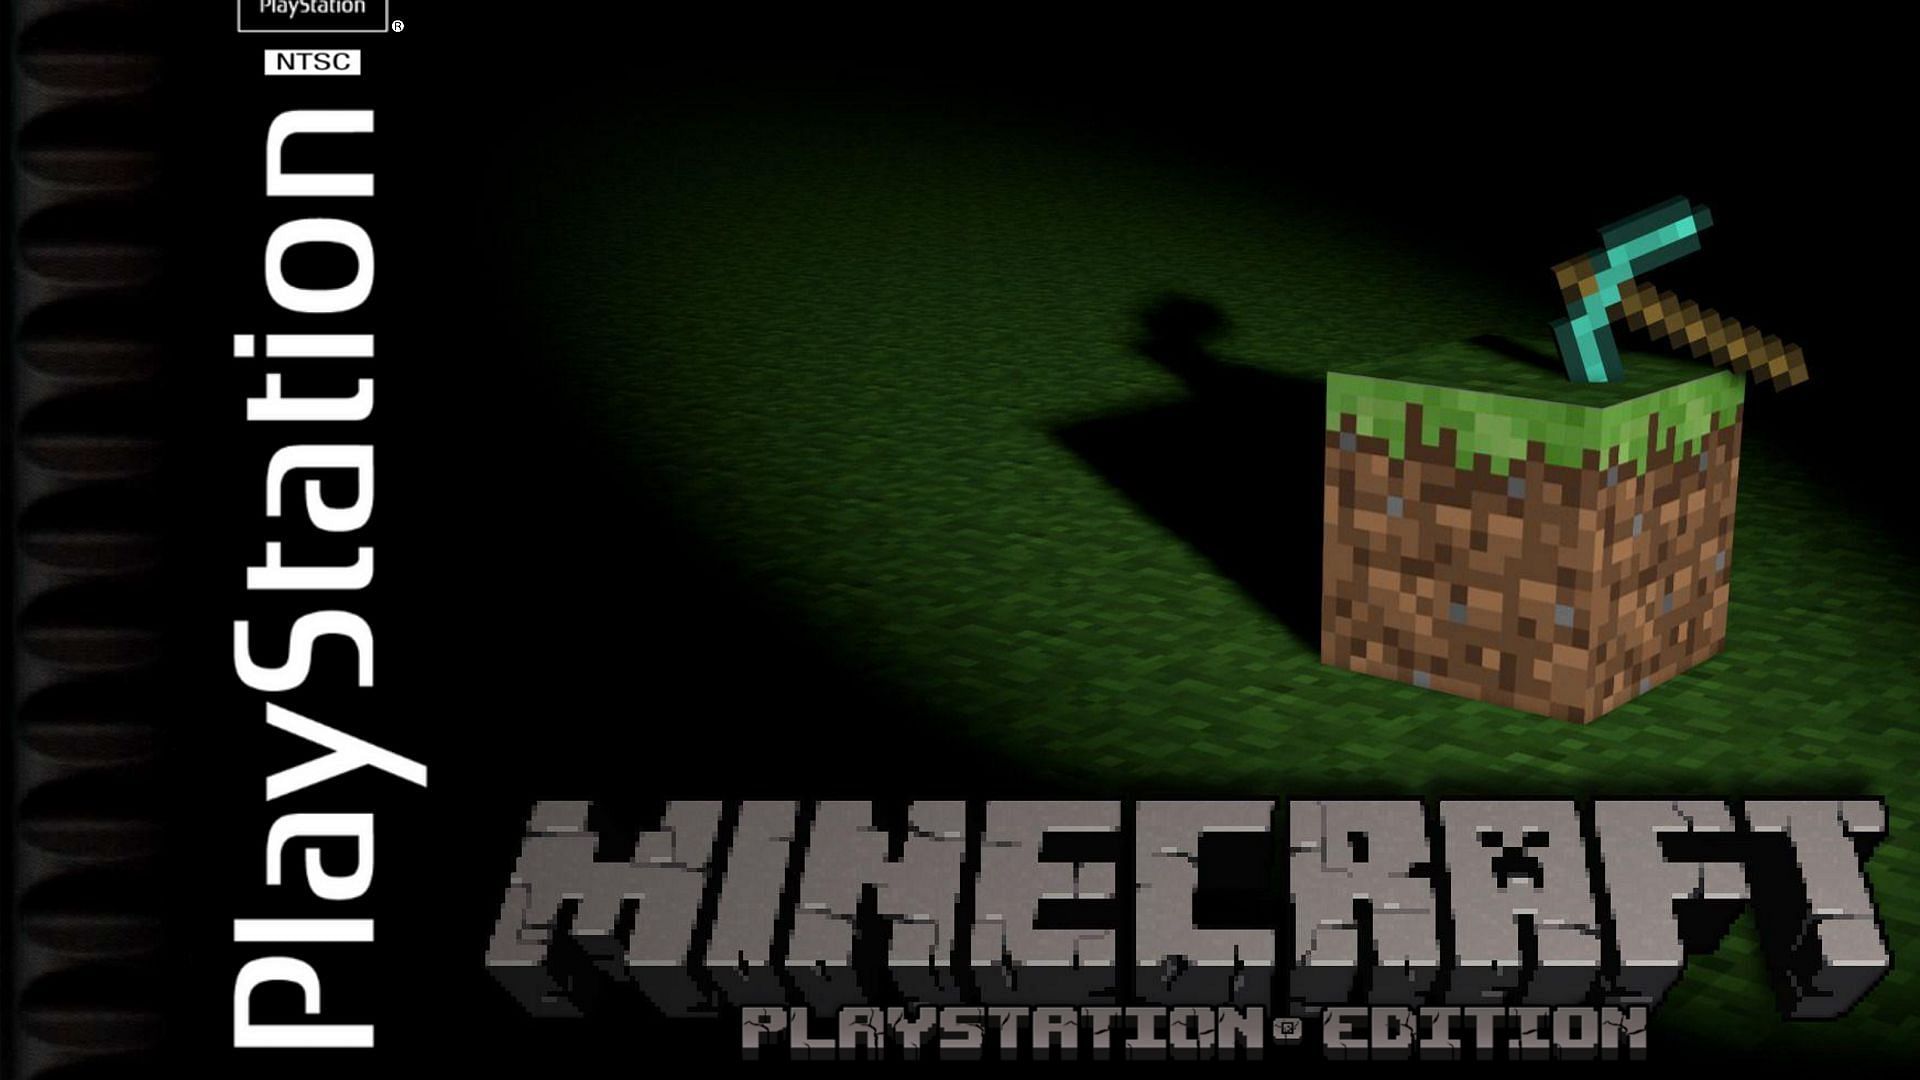 Minecraft PSX is a modpack that reimagines the game as a retro PS1 game.